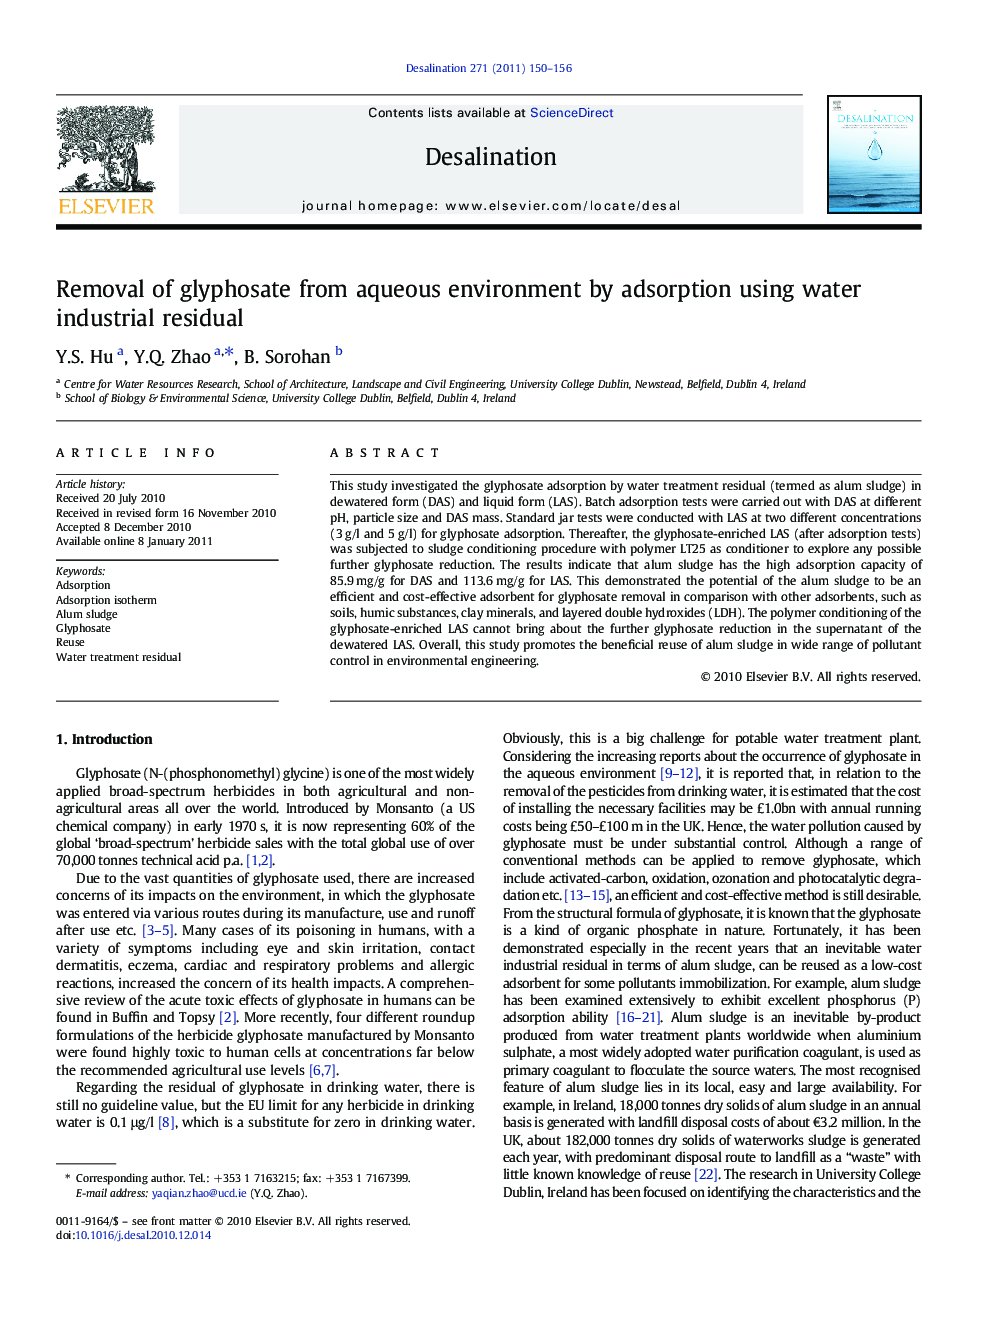 Removal of glyphosate from aqueous environment by adsorption using water industrial residual